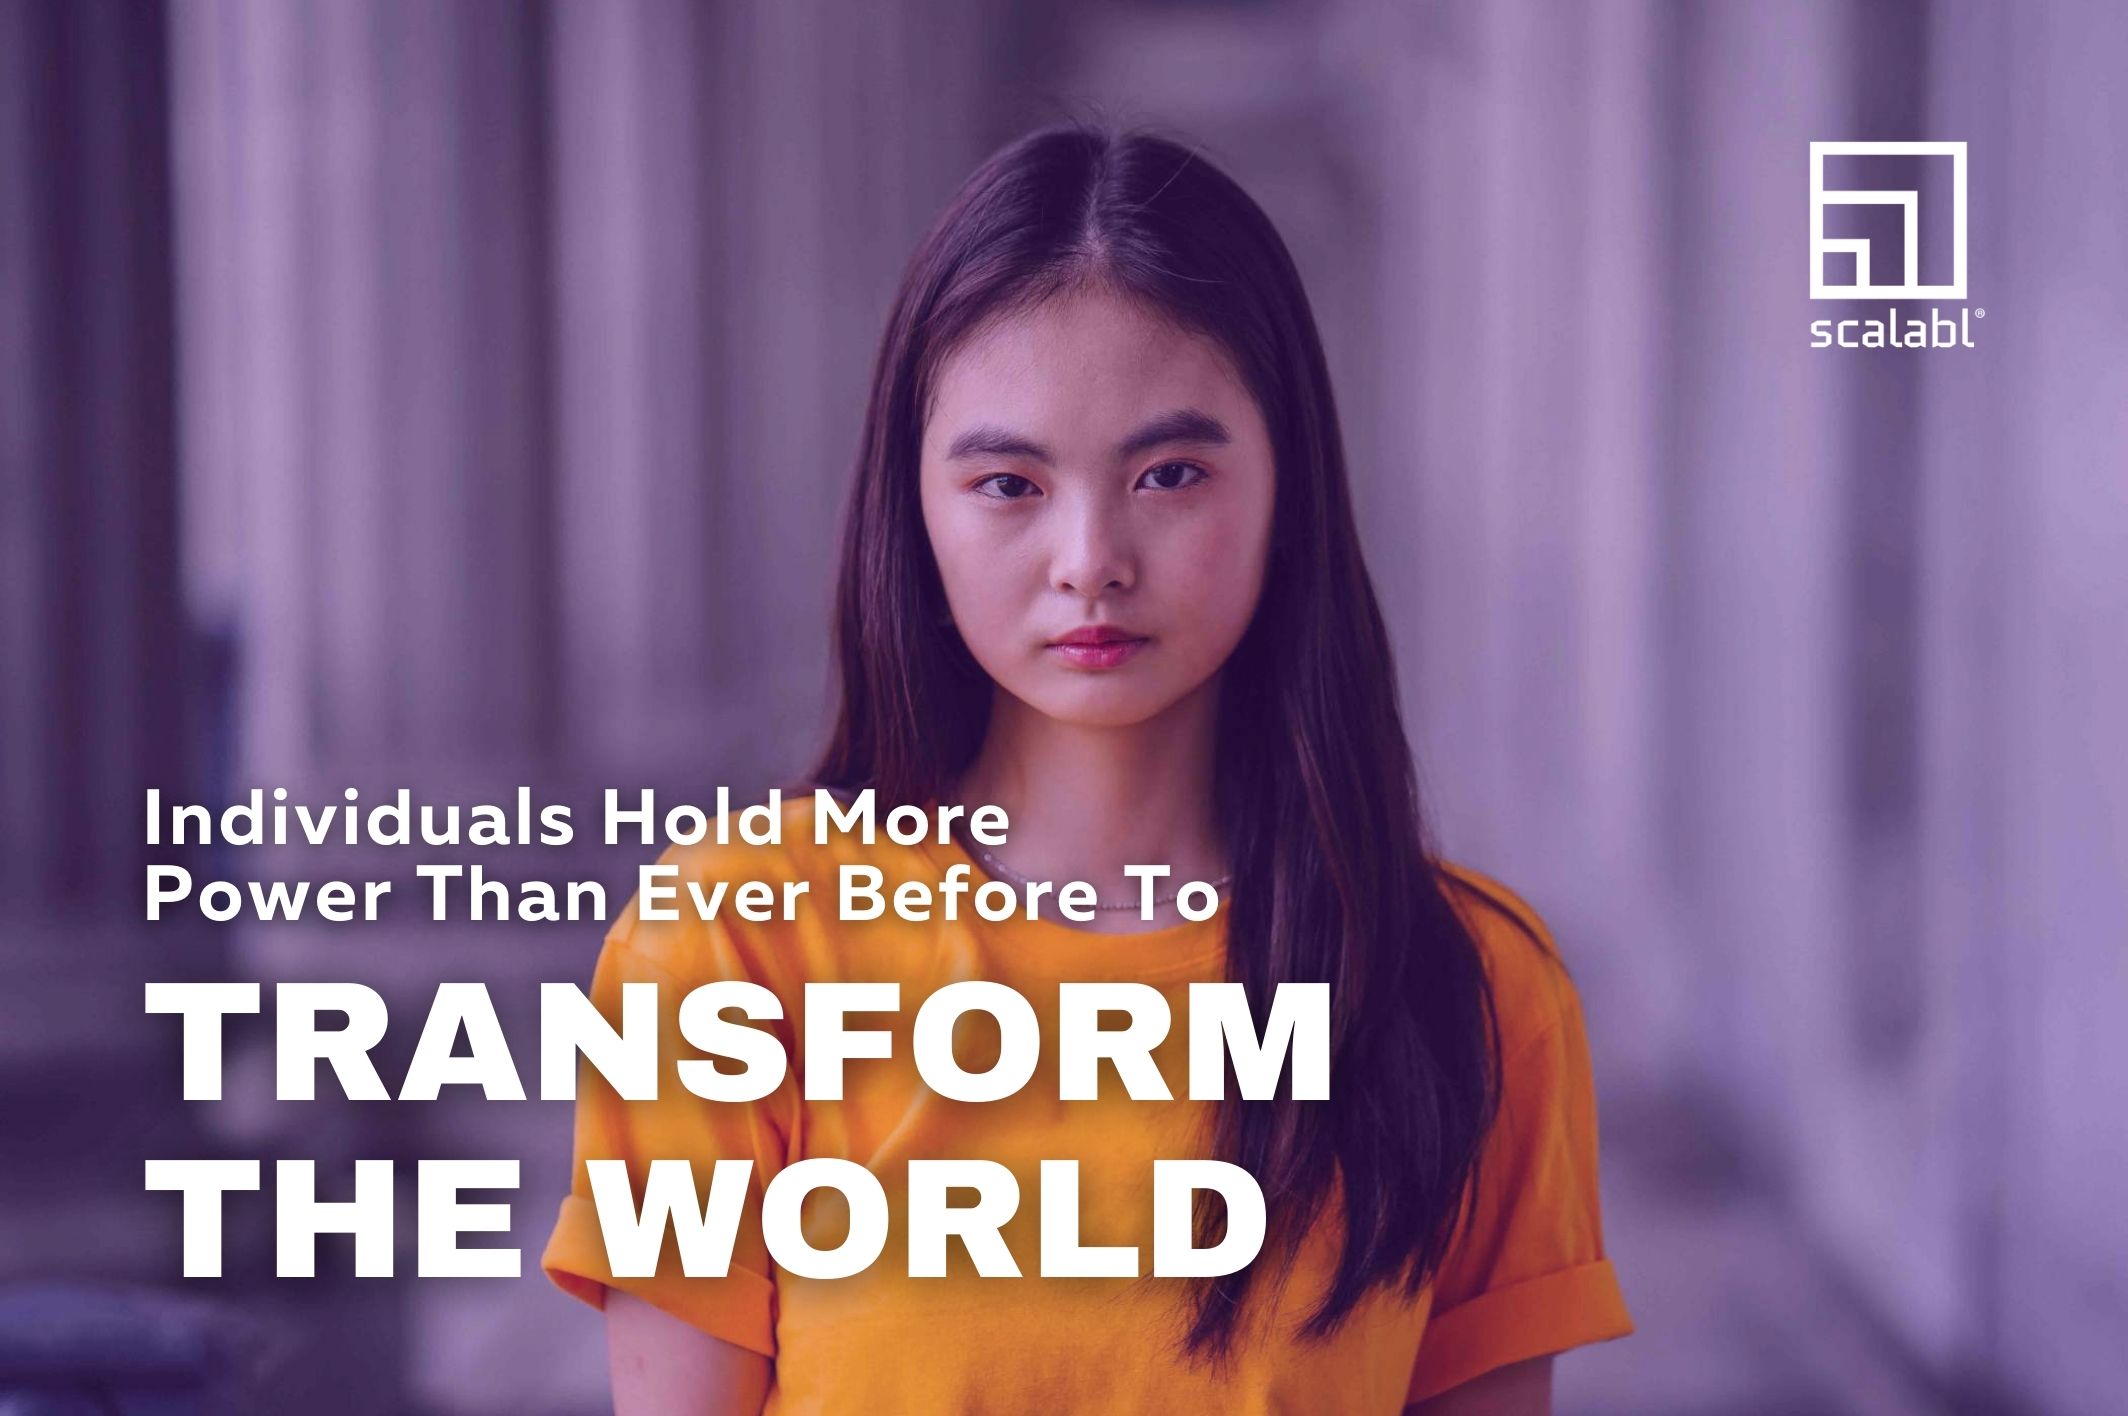 Individuals Hold More Power than Ever Before to Transform the World